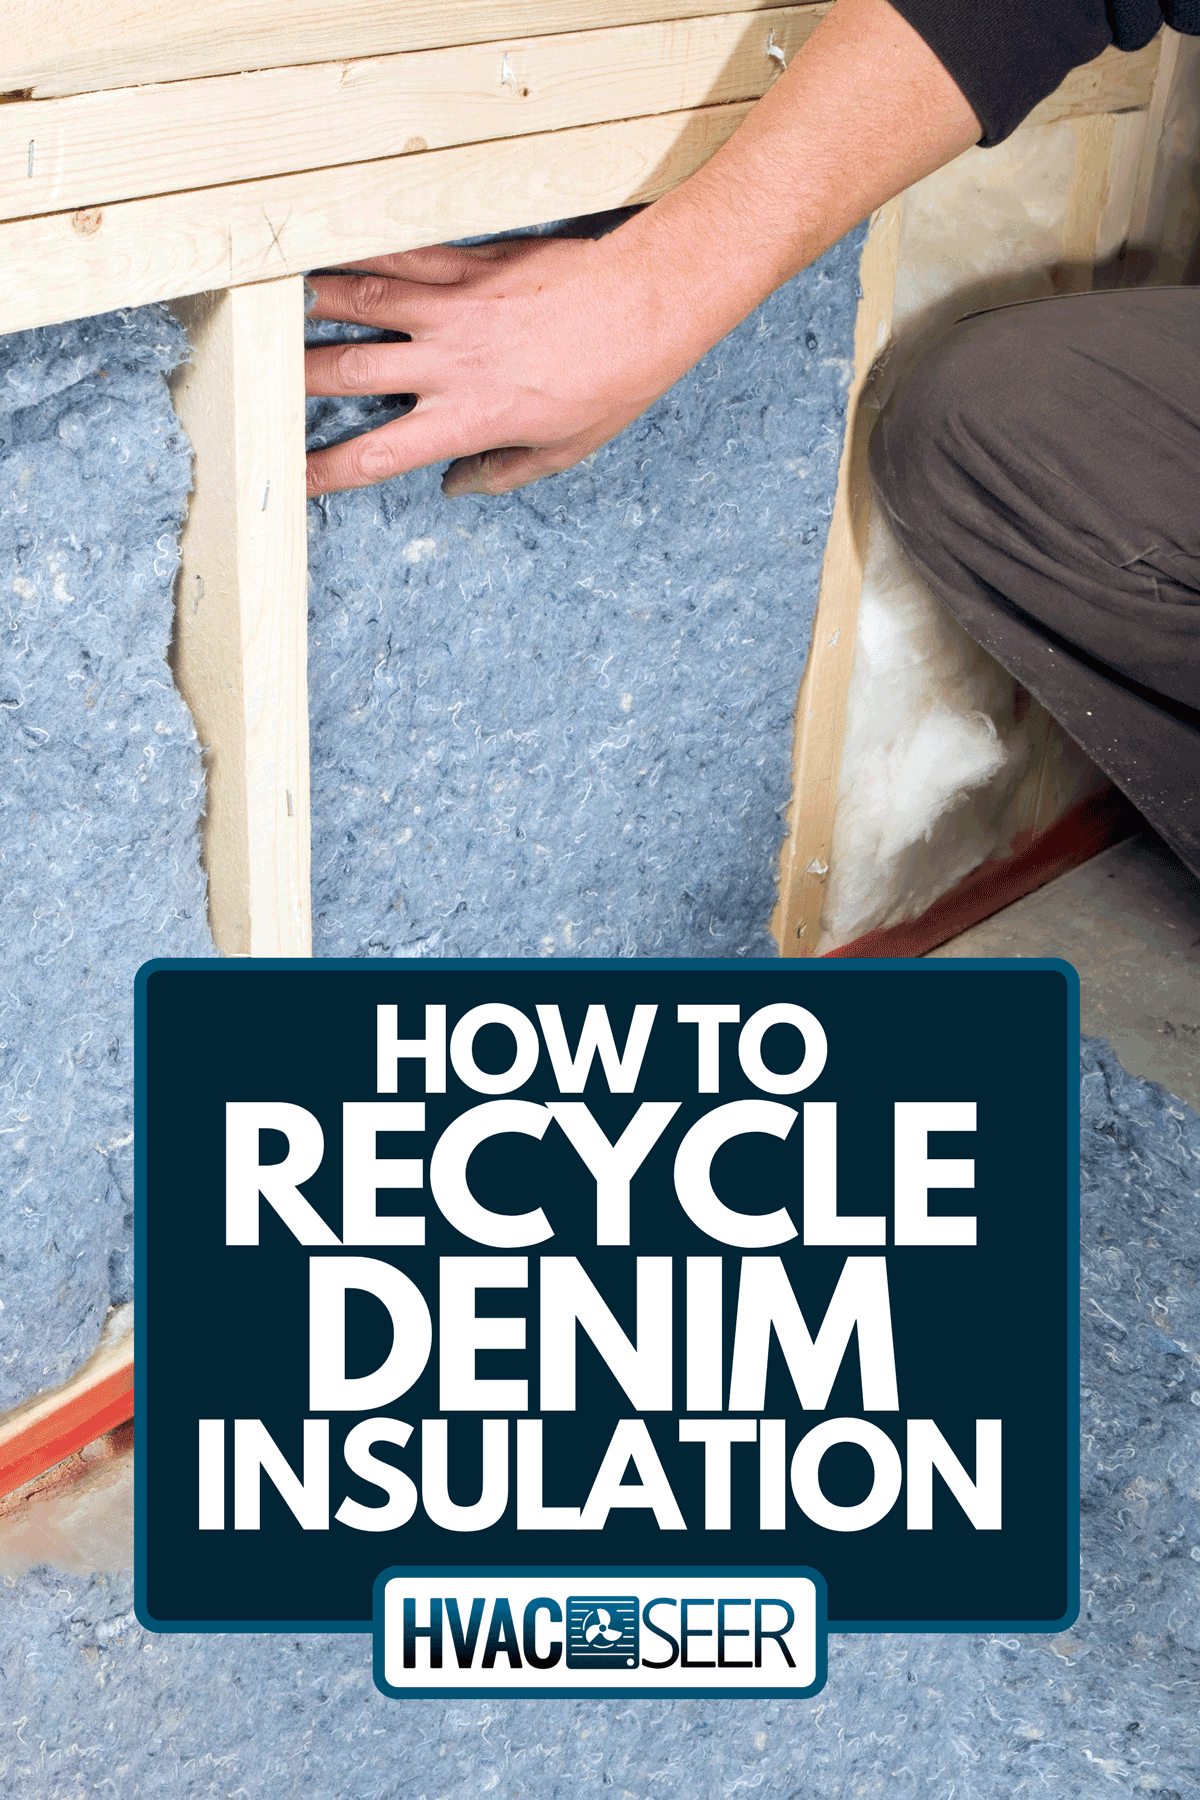 Installing a recycled blue jean denim insulation in wall frame, How To Recycle Denim Insulation